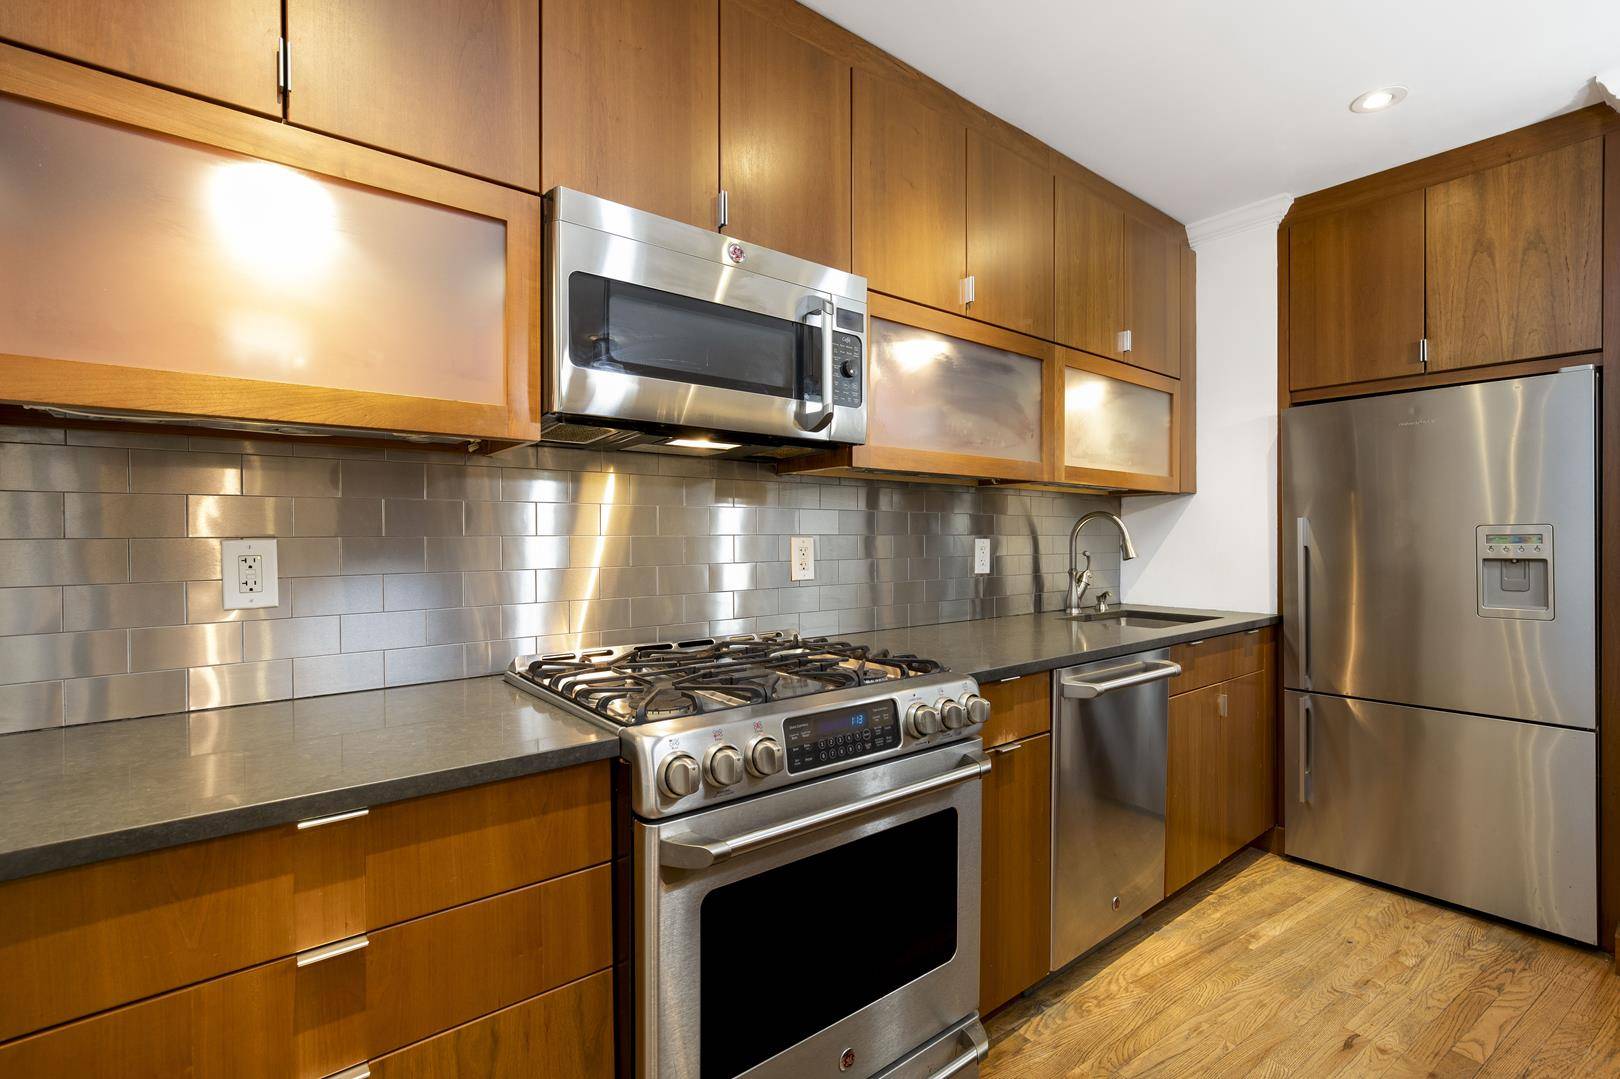 Experience quintessential Greenwich Village living in this meticulously renovated one bedroom with a home office and walk in closet.